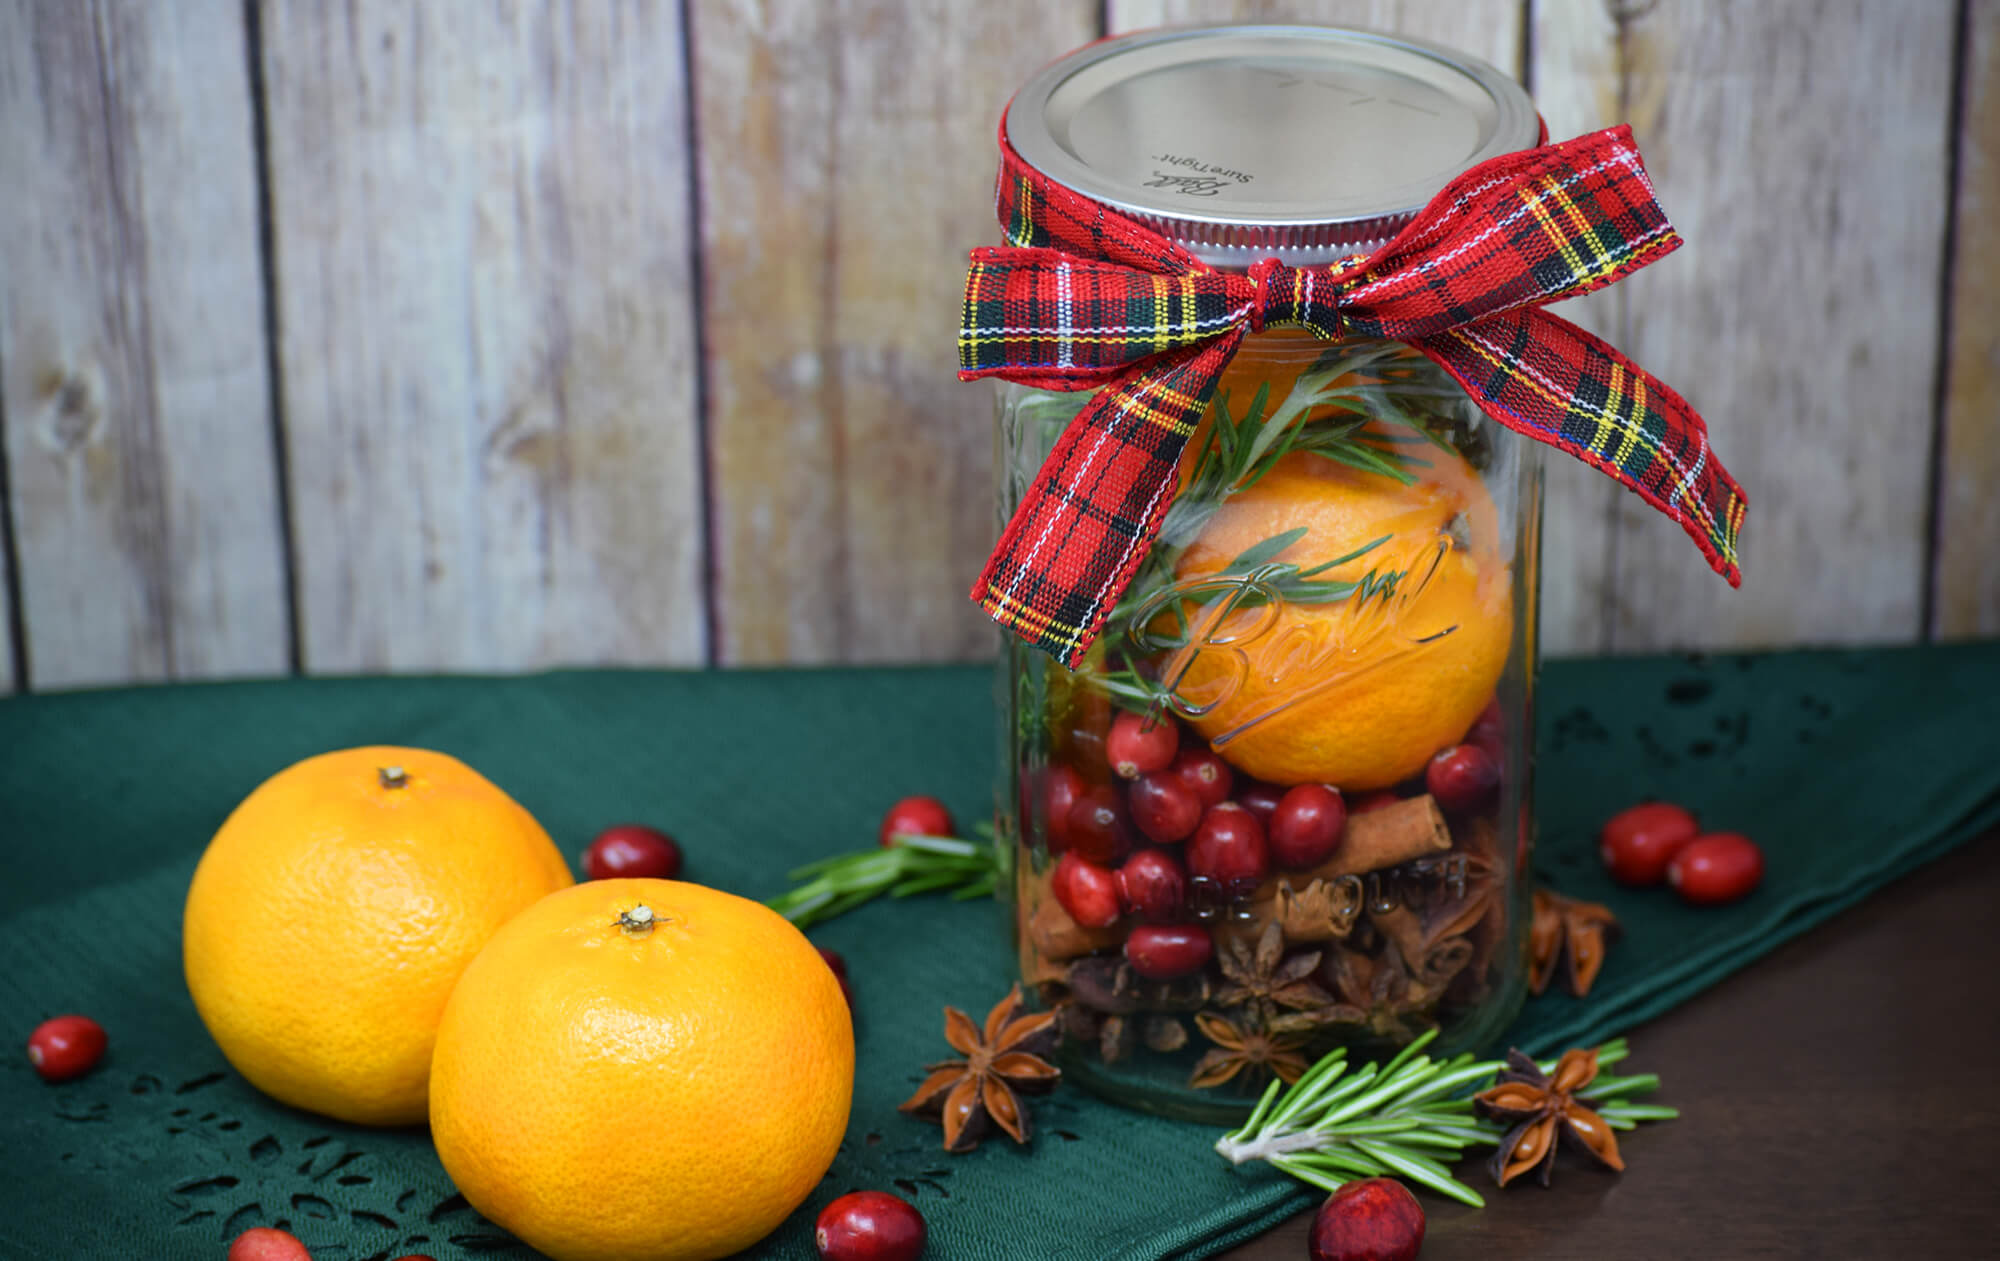 A mason jar filled with Christmas smells, such as mulling spices and cranberries, on a green tablecloth